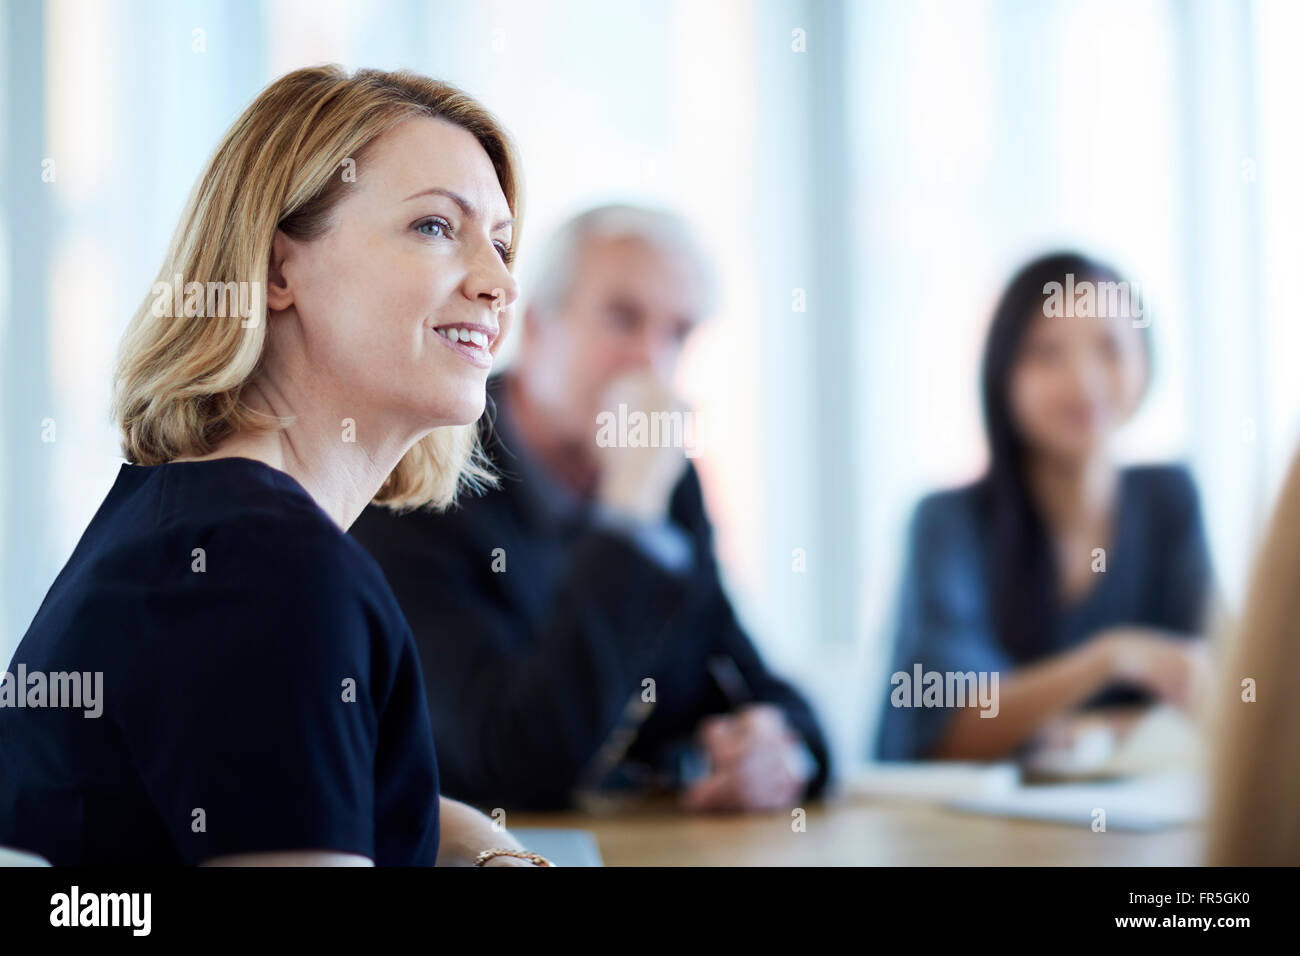 Smiling businesswoman in meeting Banque D'Images